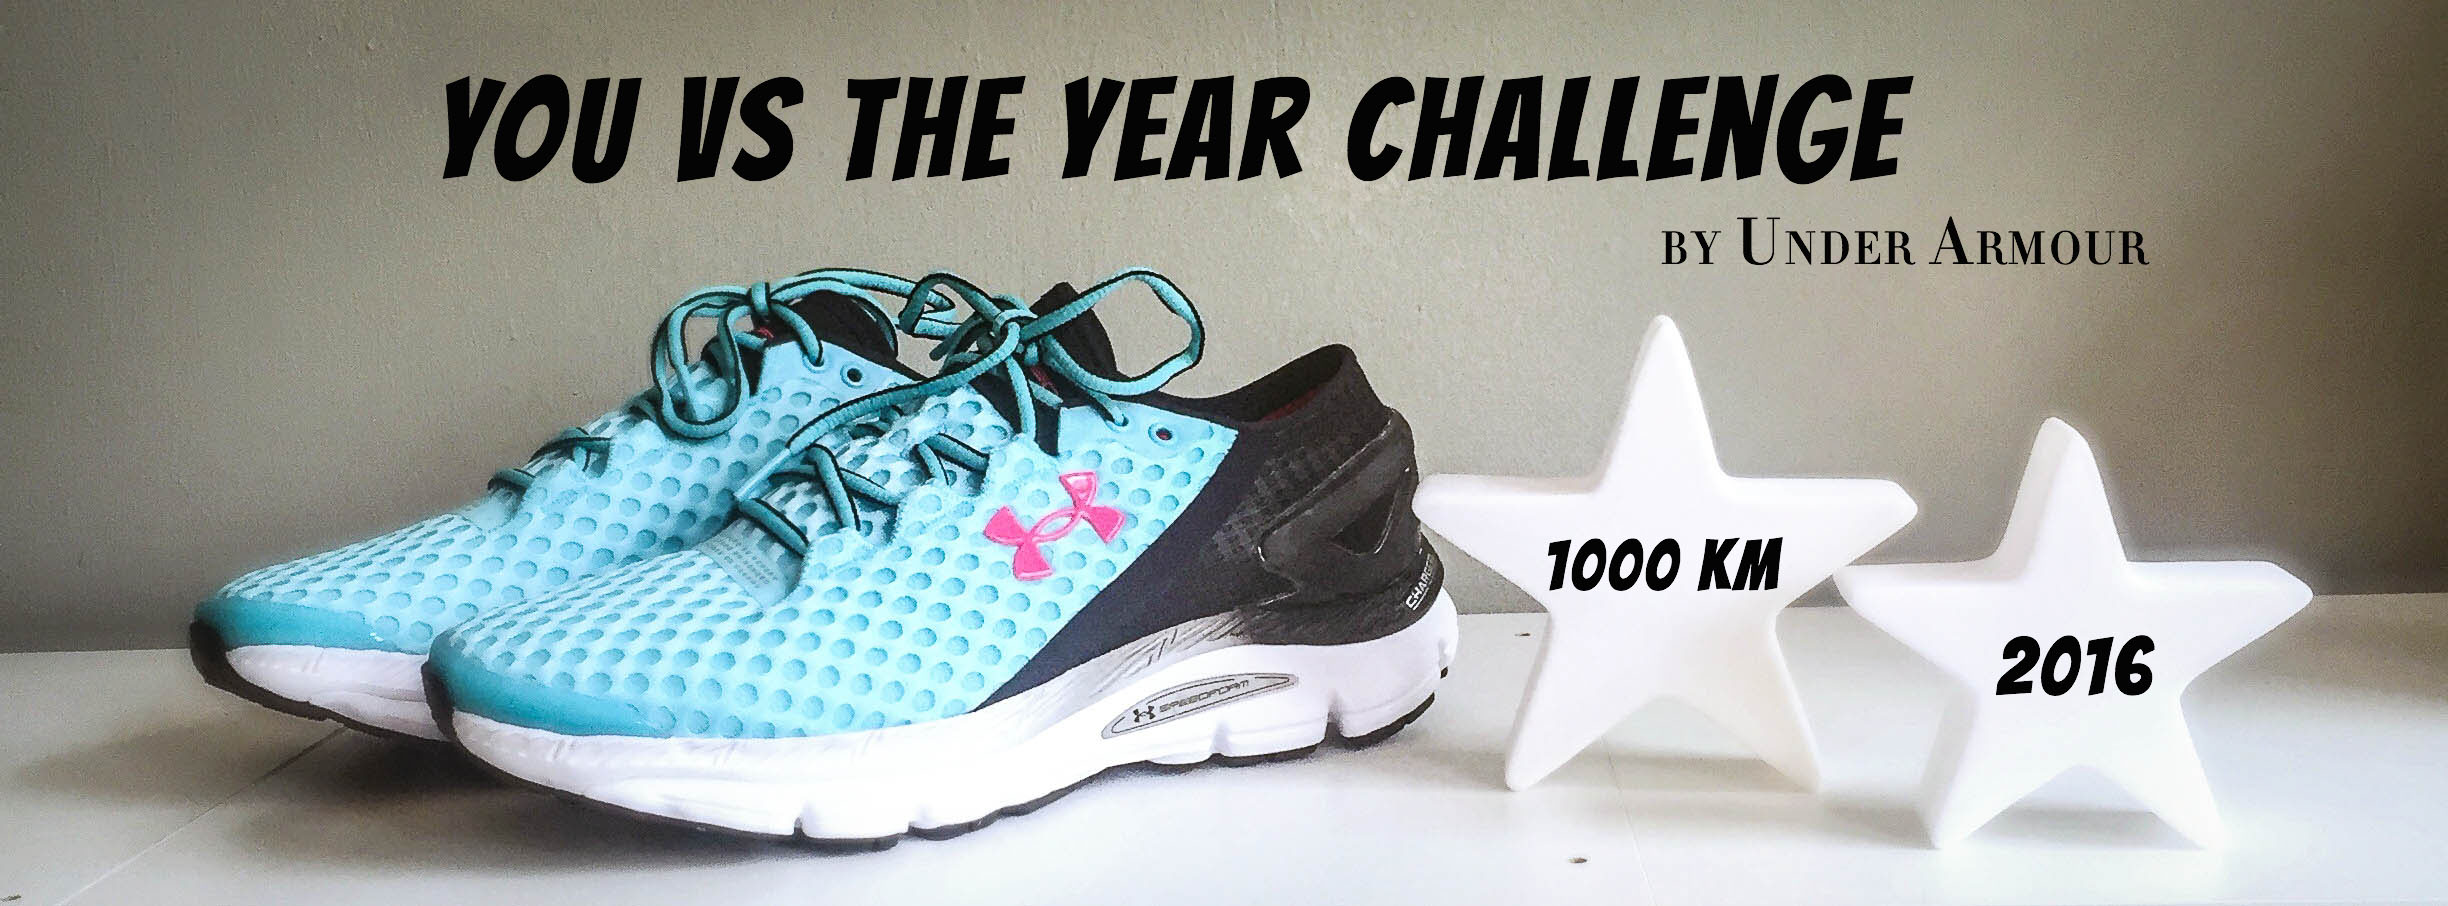 You VS the Year Running Challenge by Under Armour